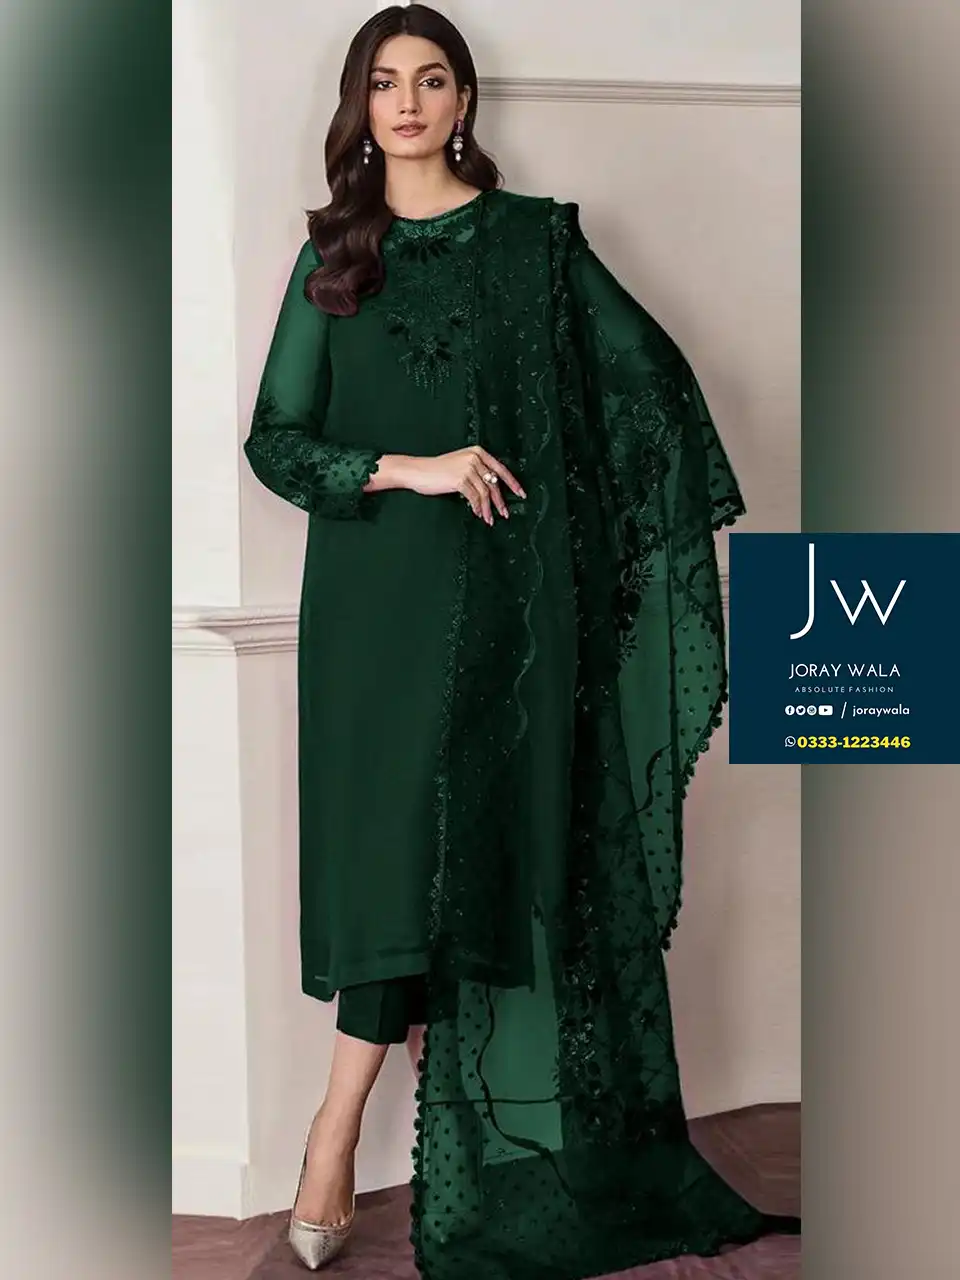 Partywear Fancy 3 pcs suit in beautiful green color with free delivery at joraywala